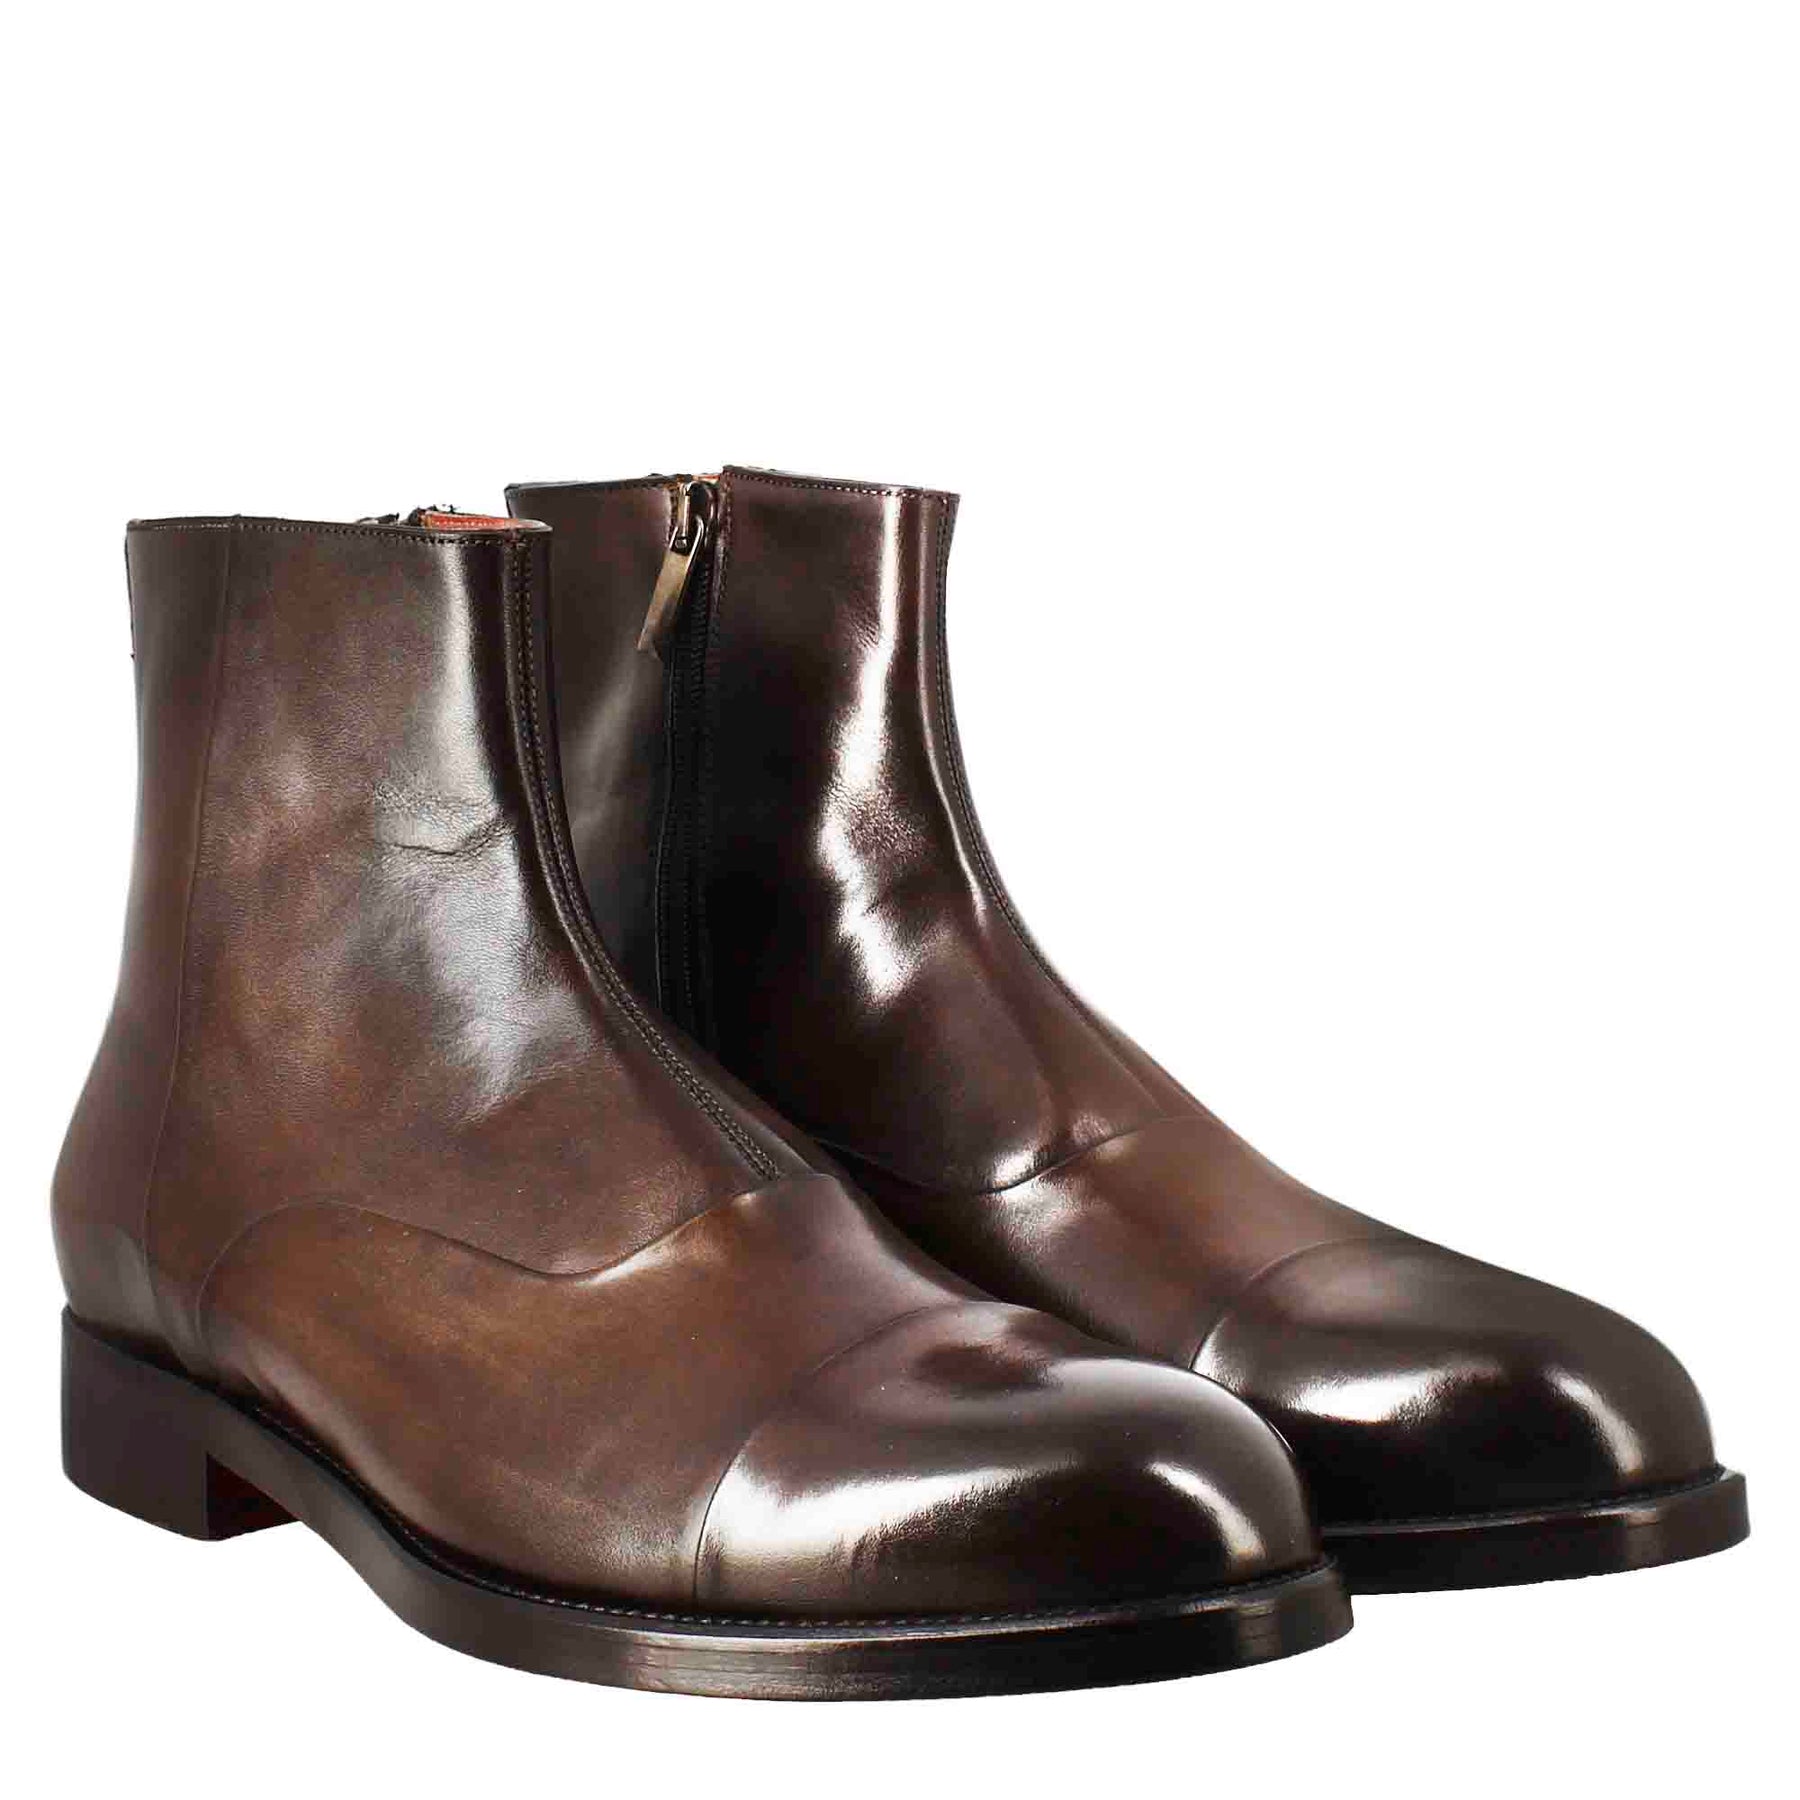 High men's ankle boot in chocolate-colored leather with zip closure